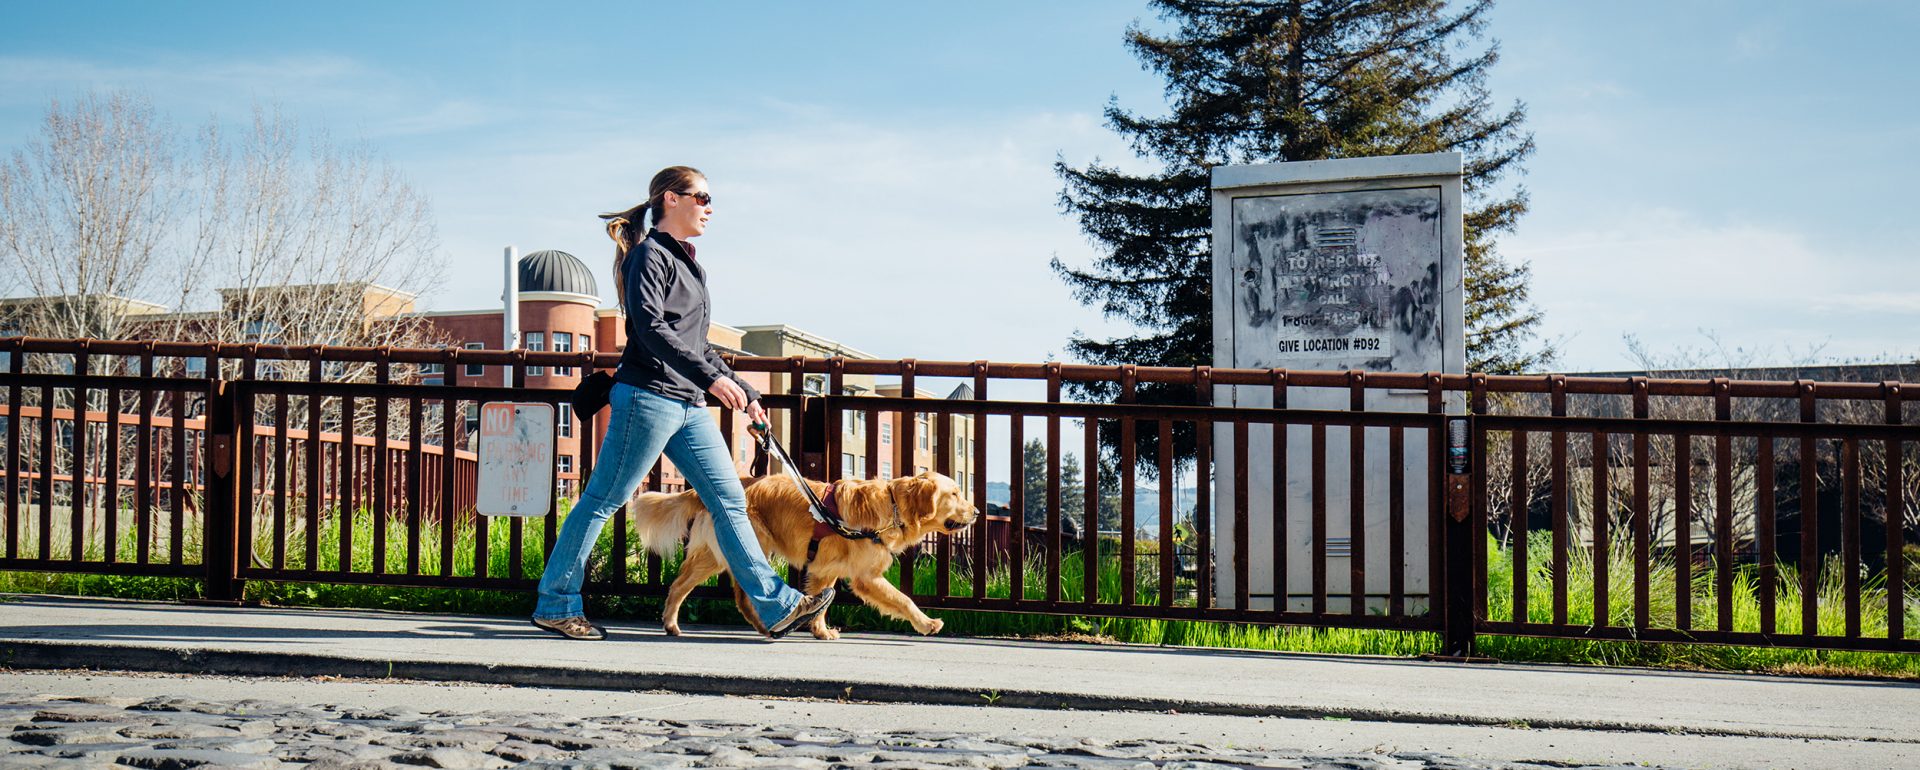 A GDB female guide dog instructor walks down the street with a Golden Retriever guide dog in training